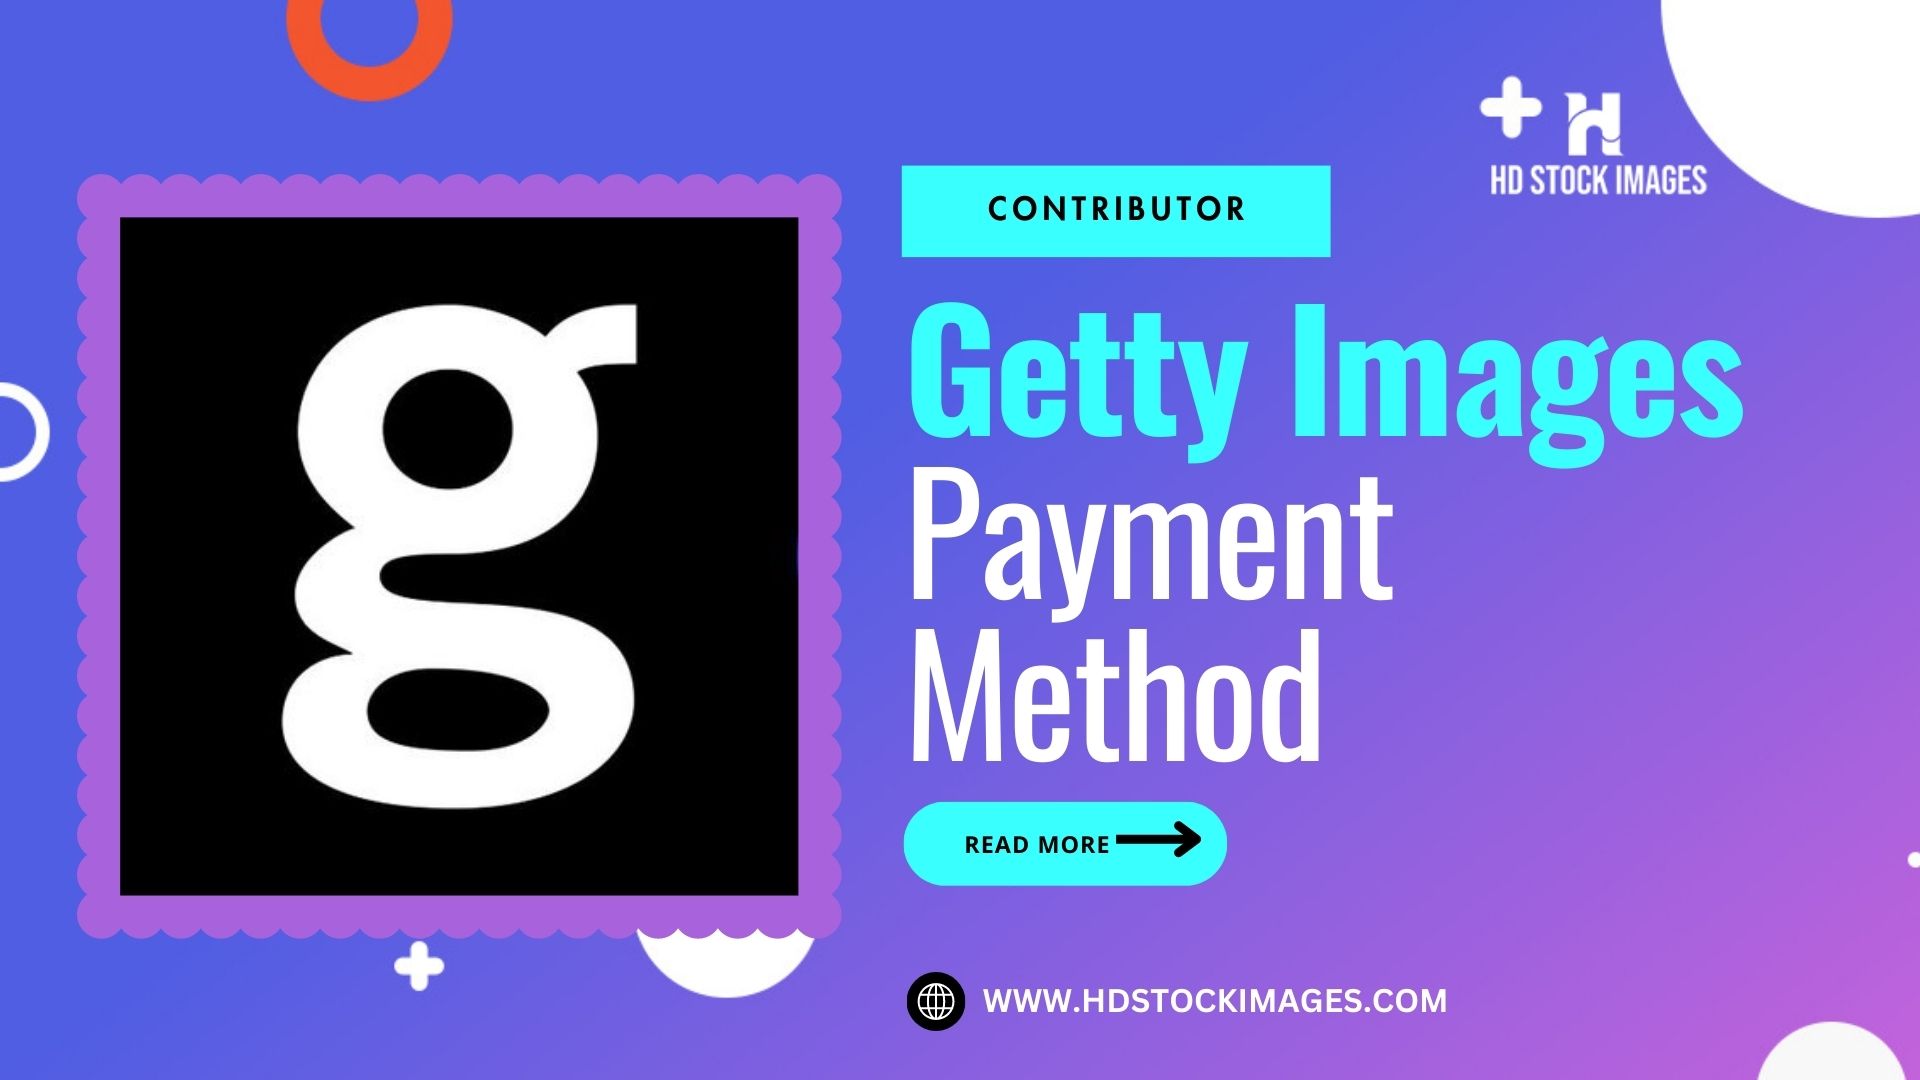 an image of Getty Images Payment Method: Options for Receiving Earnings as a Contributor